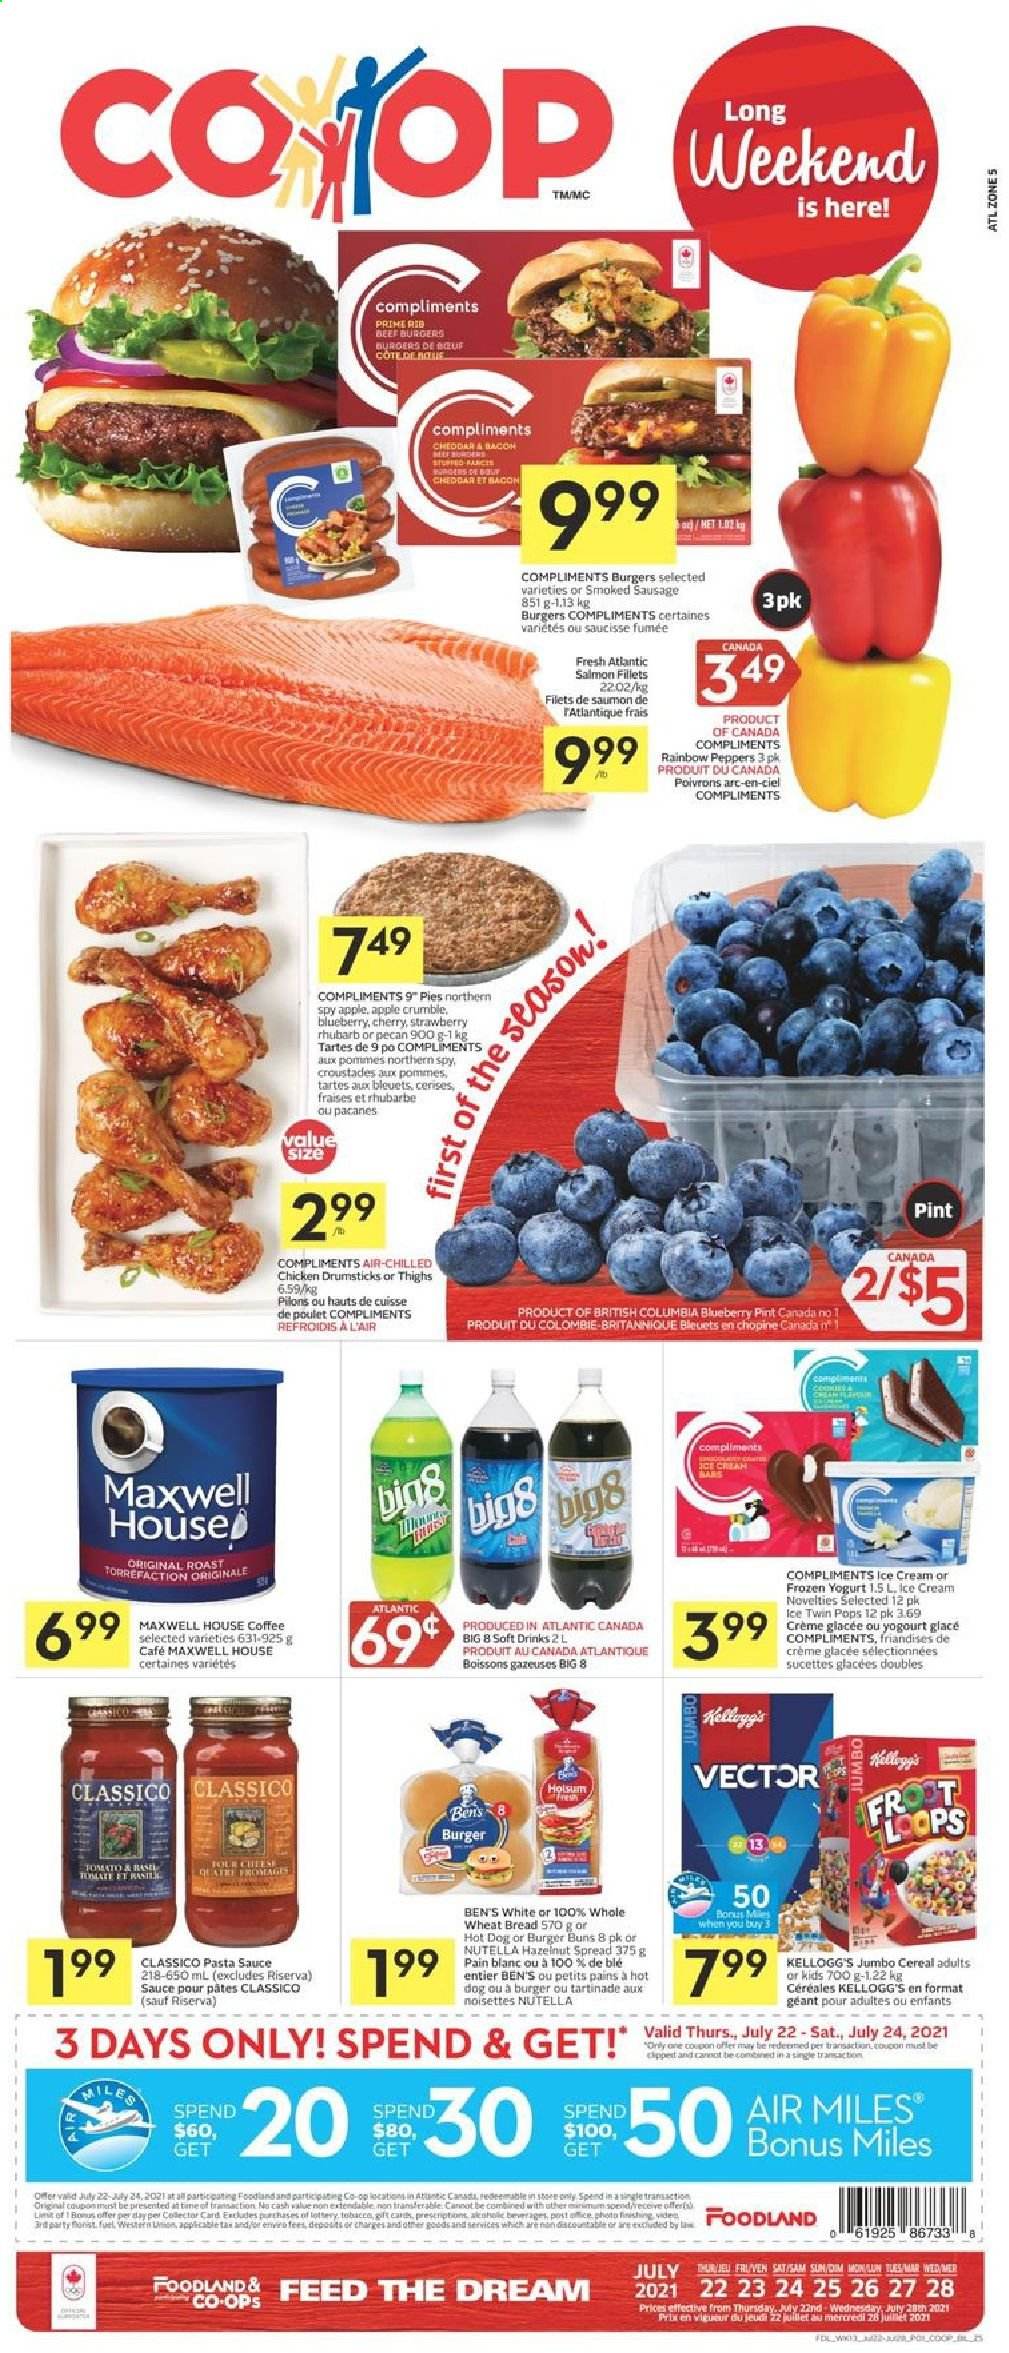 thumbnail - Co-op Flyer - July 22, 2021 - July 28, 2021 - Sales products - wheat bread, buns, burger buns, rhubarb, peppers, salmon, salmon fillet, hot dog, pasta sauce, sauce, beef burger, sausage, smoked sausage, cheddar, cheese, yoghurt, ice cream, Kellogg's, cereals, Classico, soft drink, Maxwell House, coffee, chicken drumsticks, chicken, Nutella. Page 1.